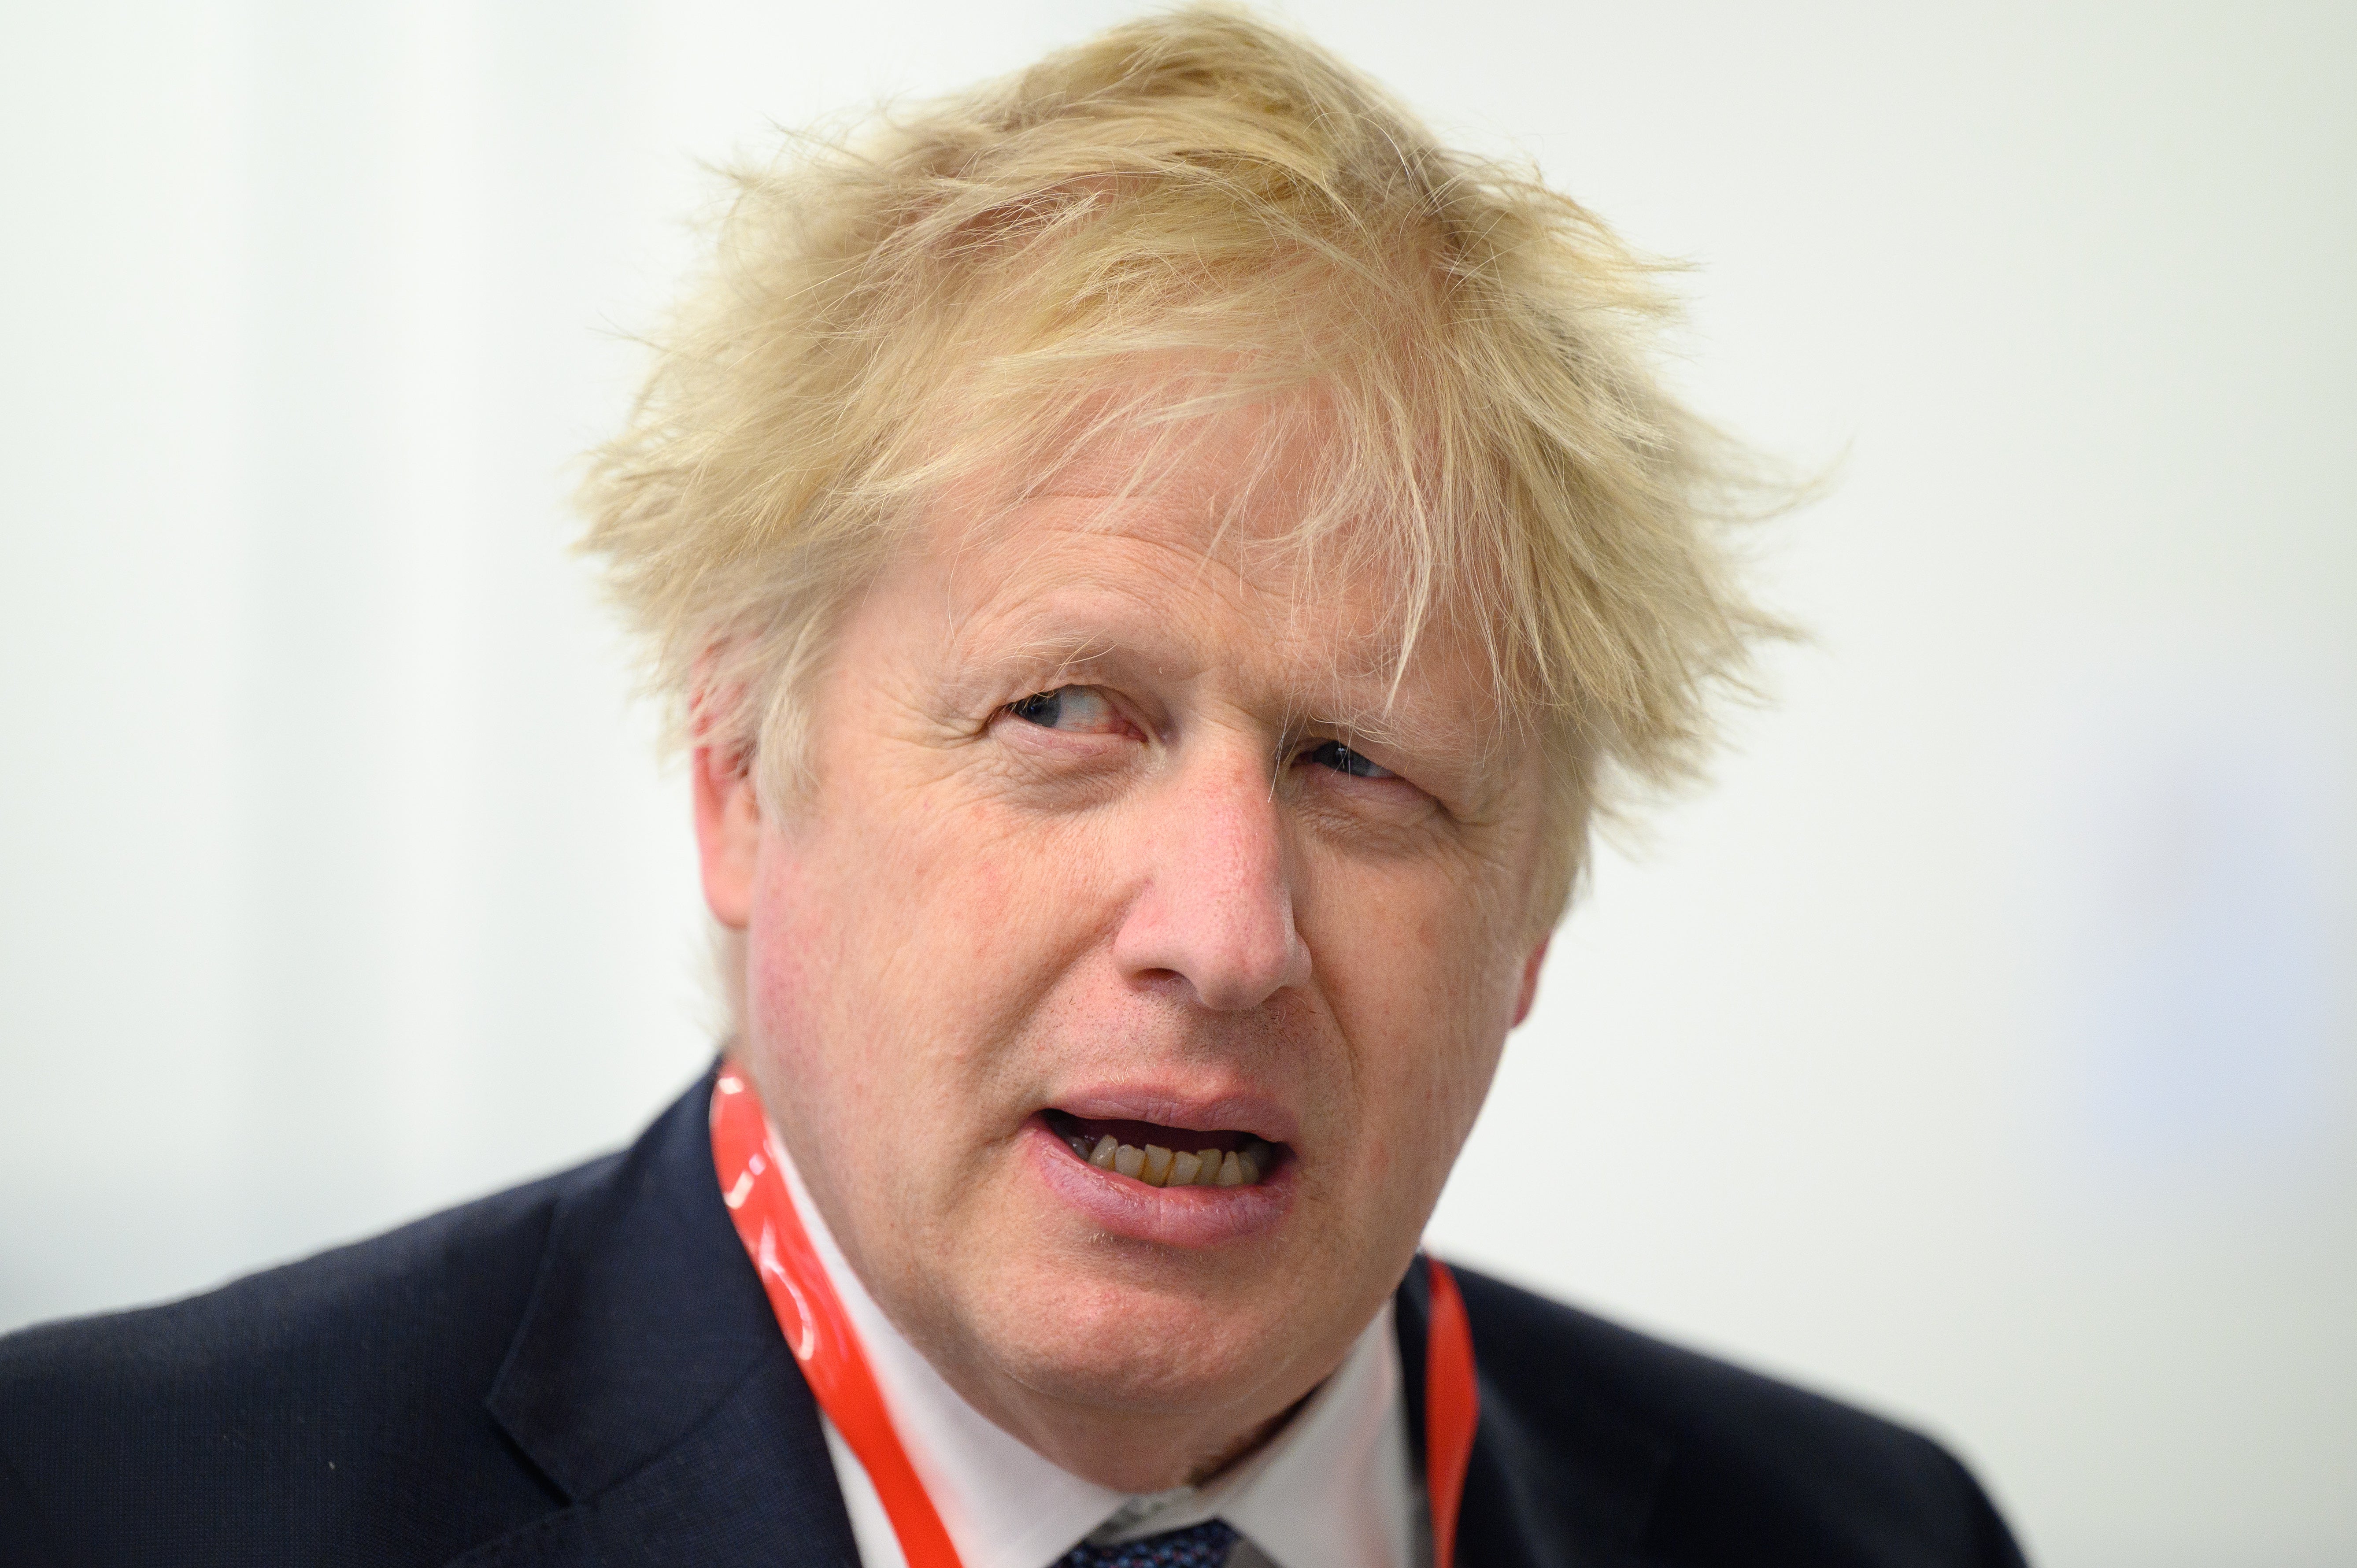 Party hangover: Johnson is nervous about his future